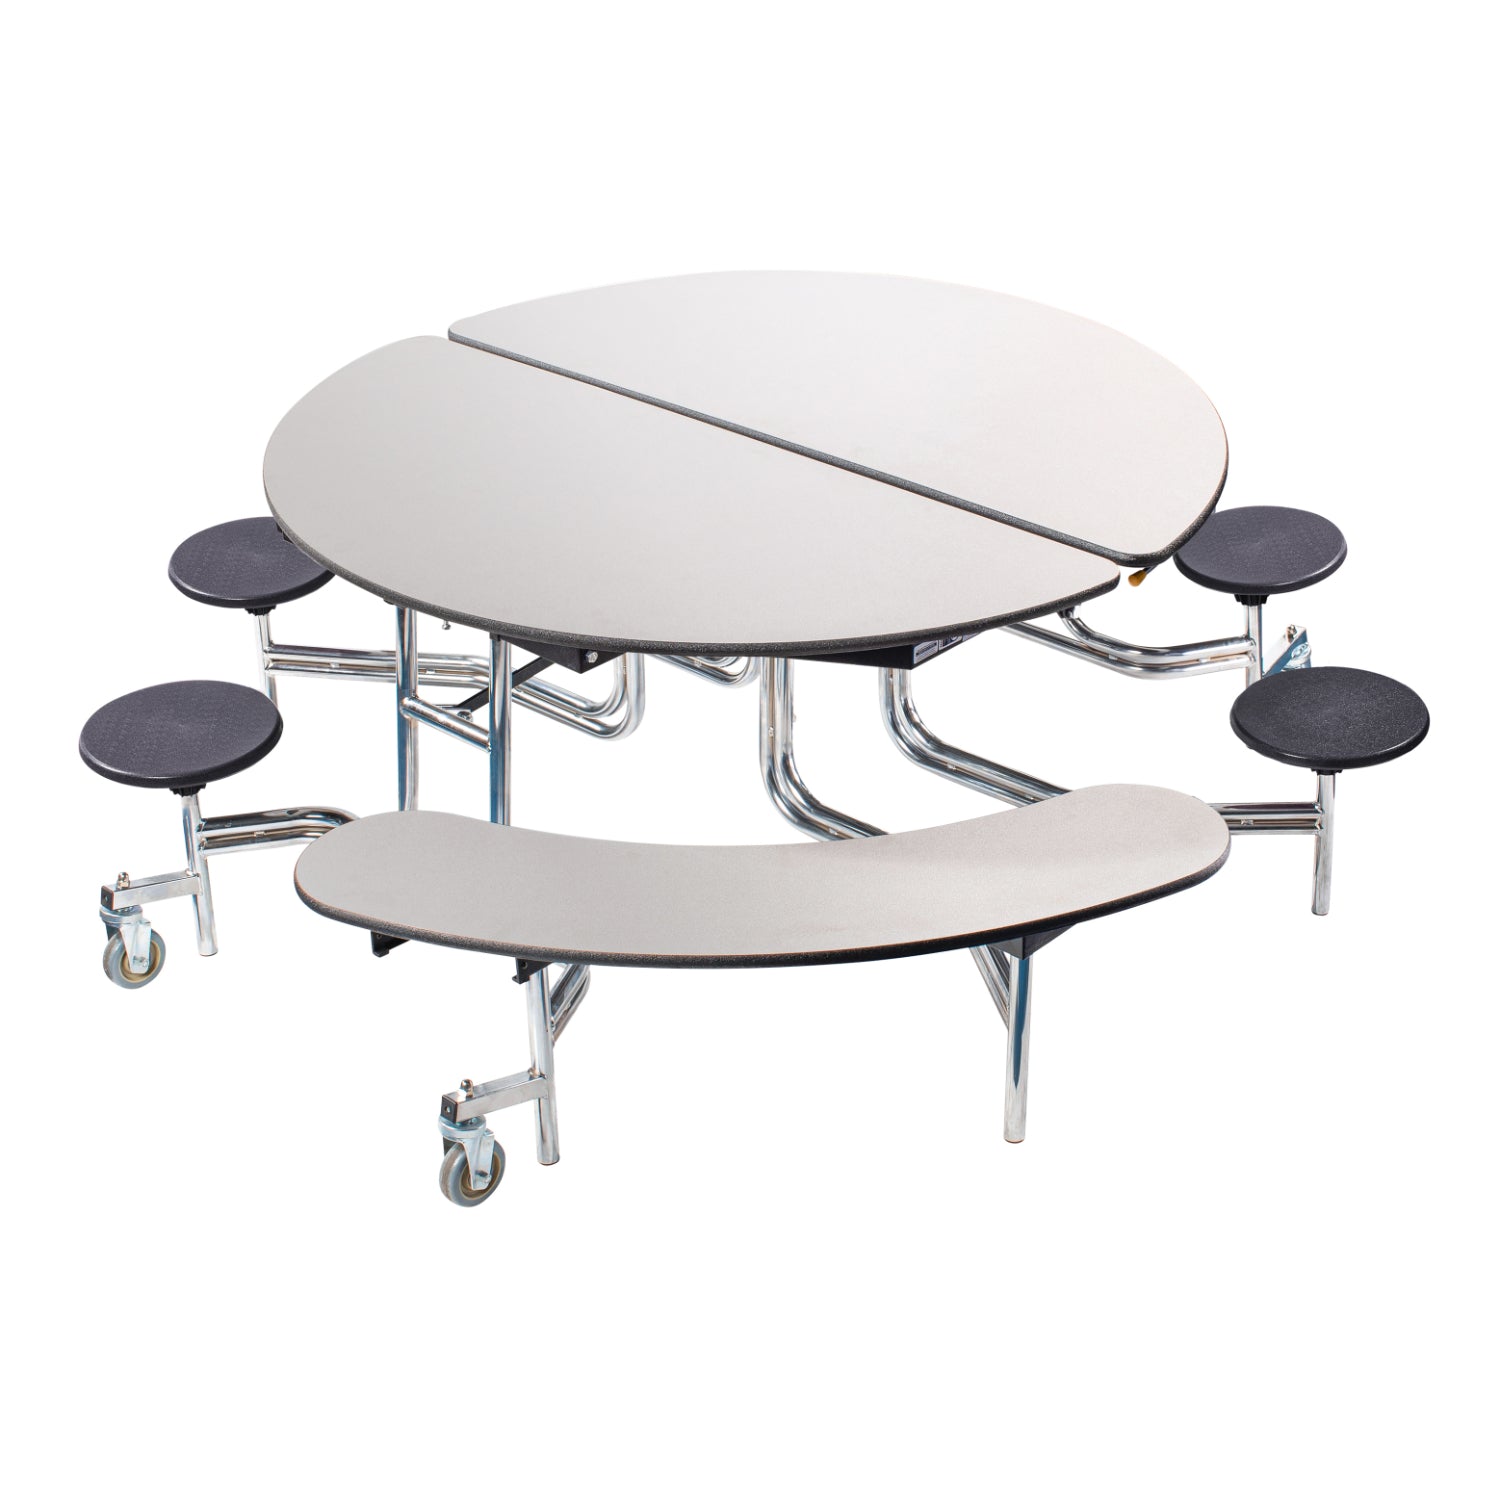 Mobile Combo Cafeteria Table, 60" Round with Stools and Benches, MDF Core, Black ProtectEdge, Chrome Frame